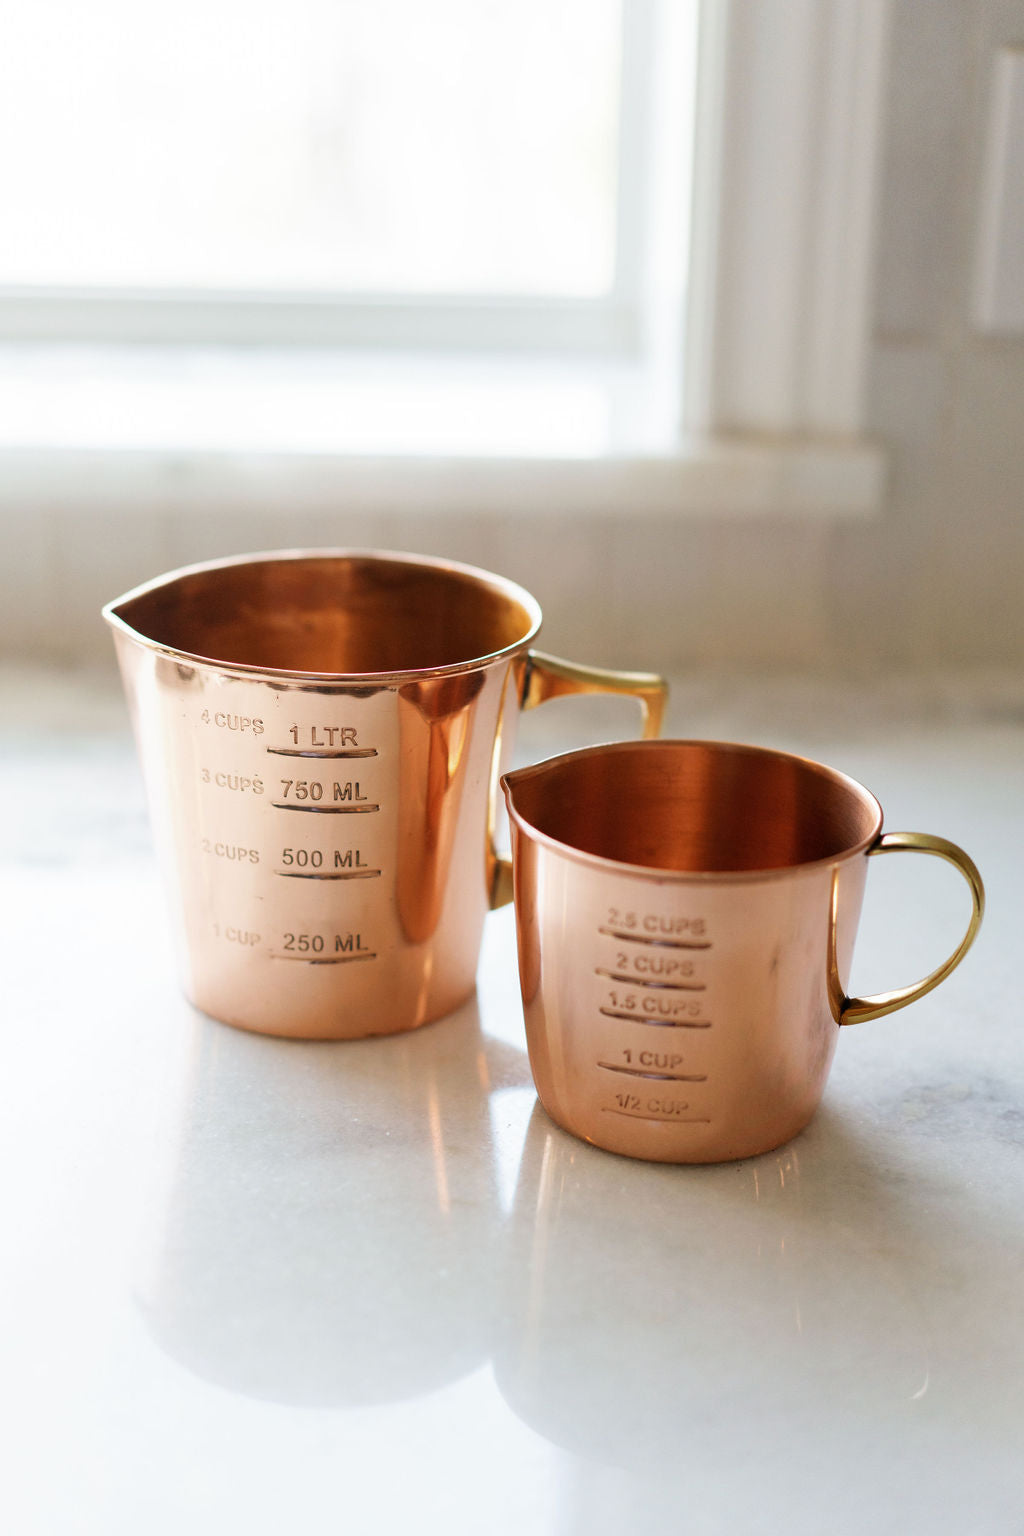 Measuring Cup Set Black & Copper Color Measuring Cups 50 Ml to 250